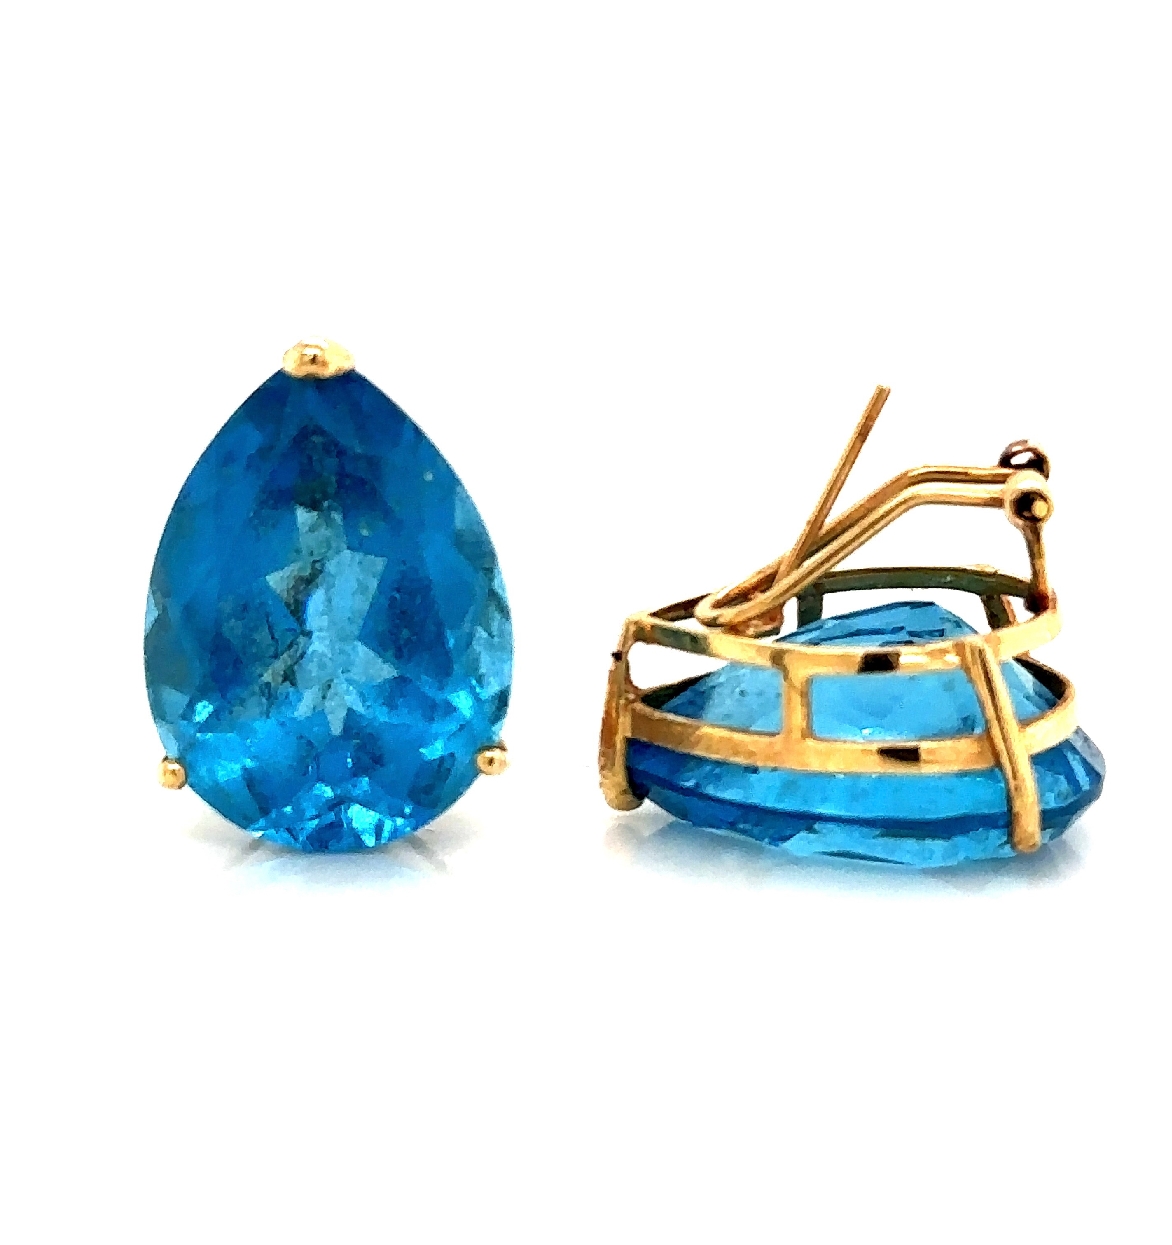 14K Yellow Gold Blue Pear Topaz Earrings with Omega Backing


